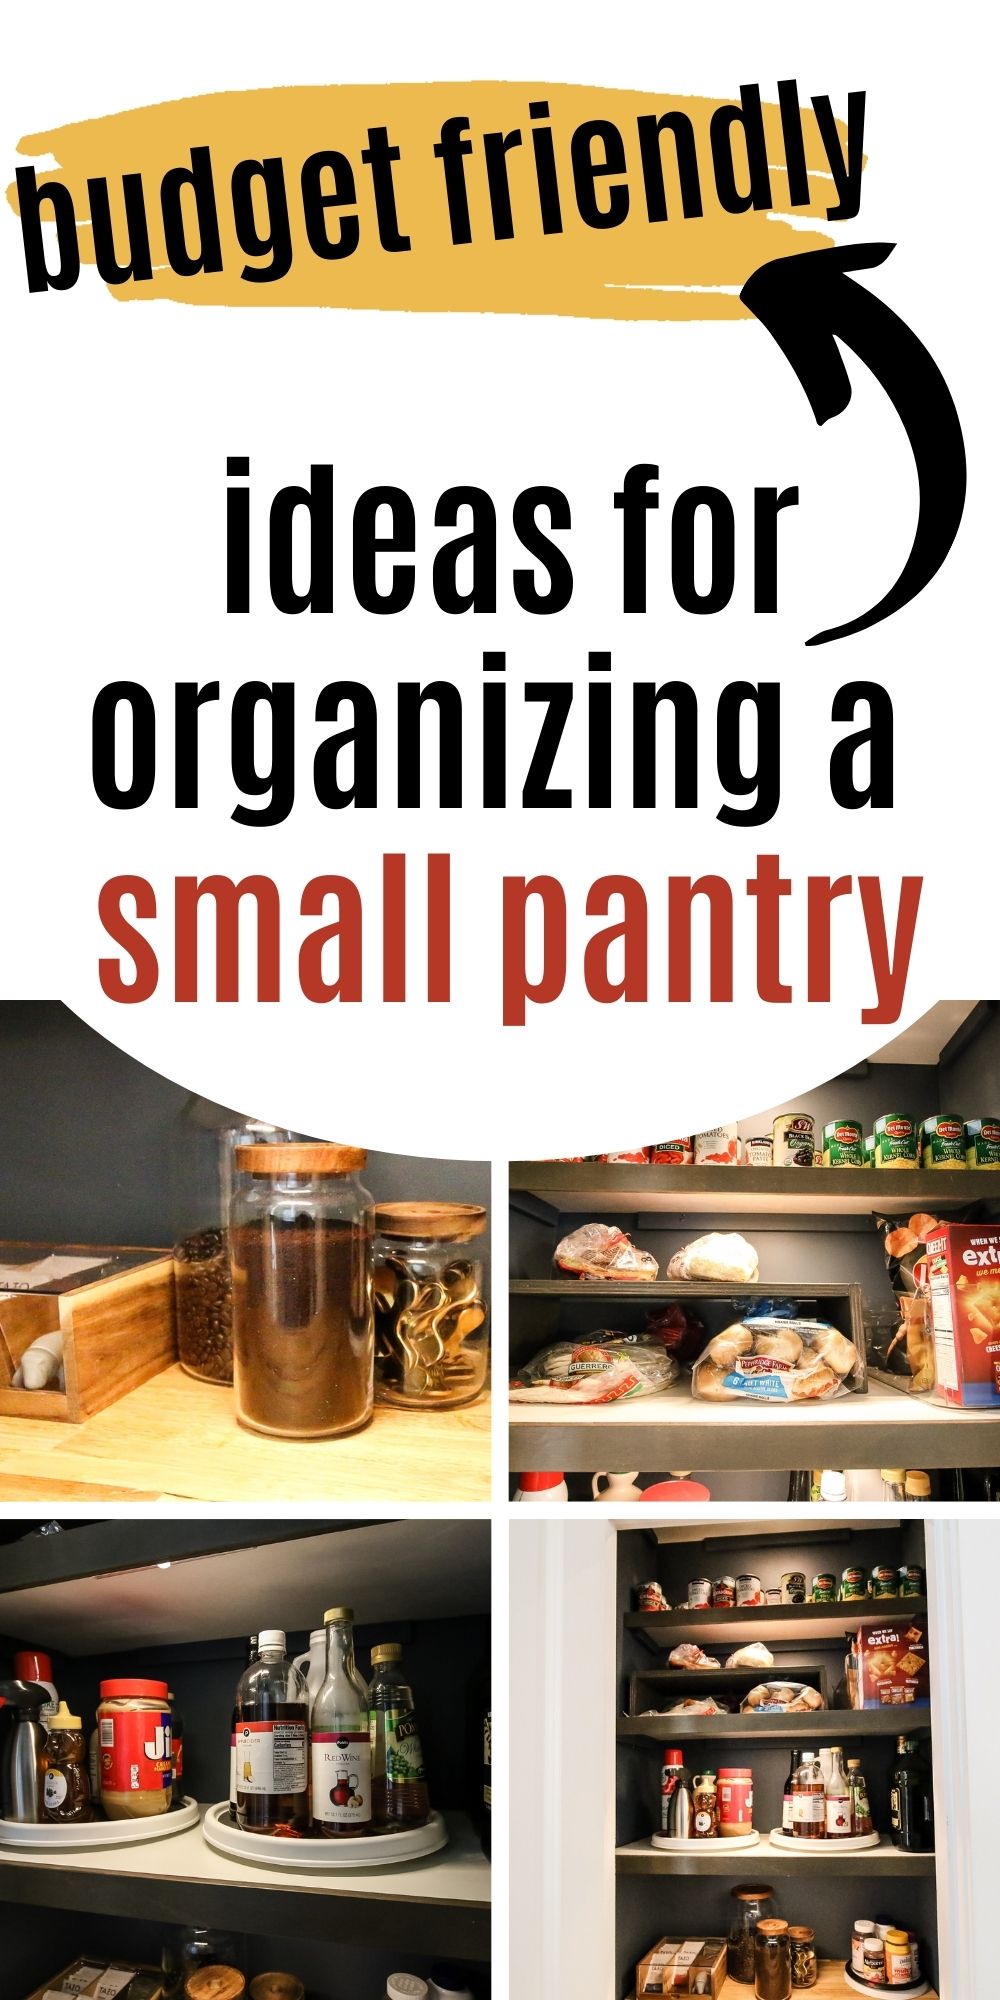 How to Organize an L-Shaped Pantry